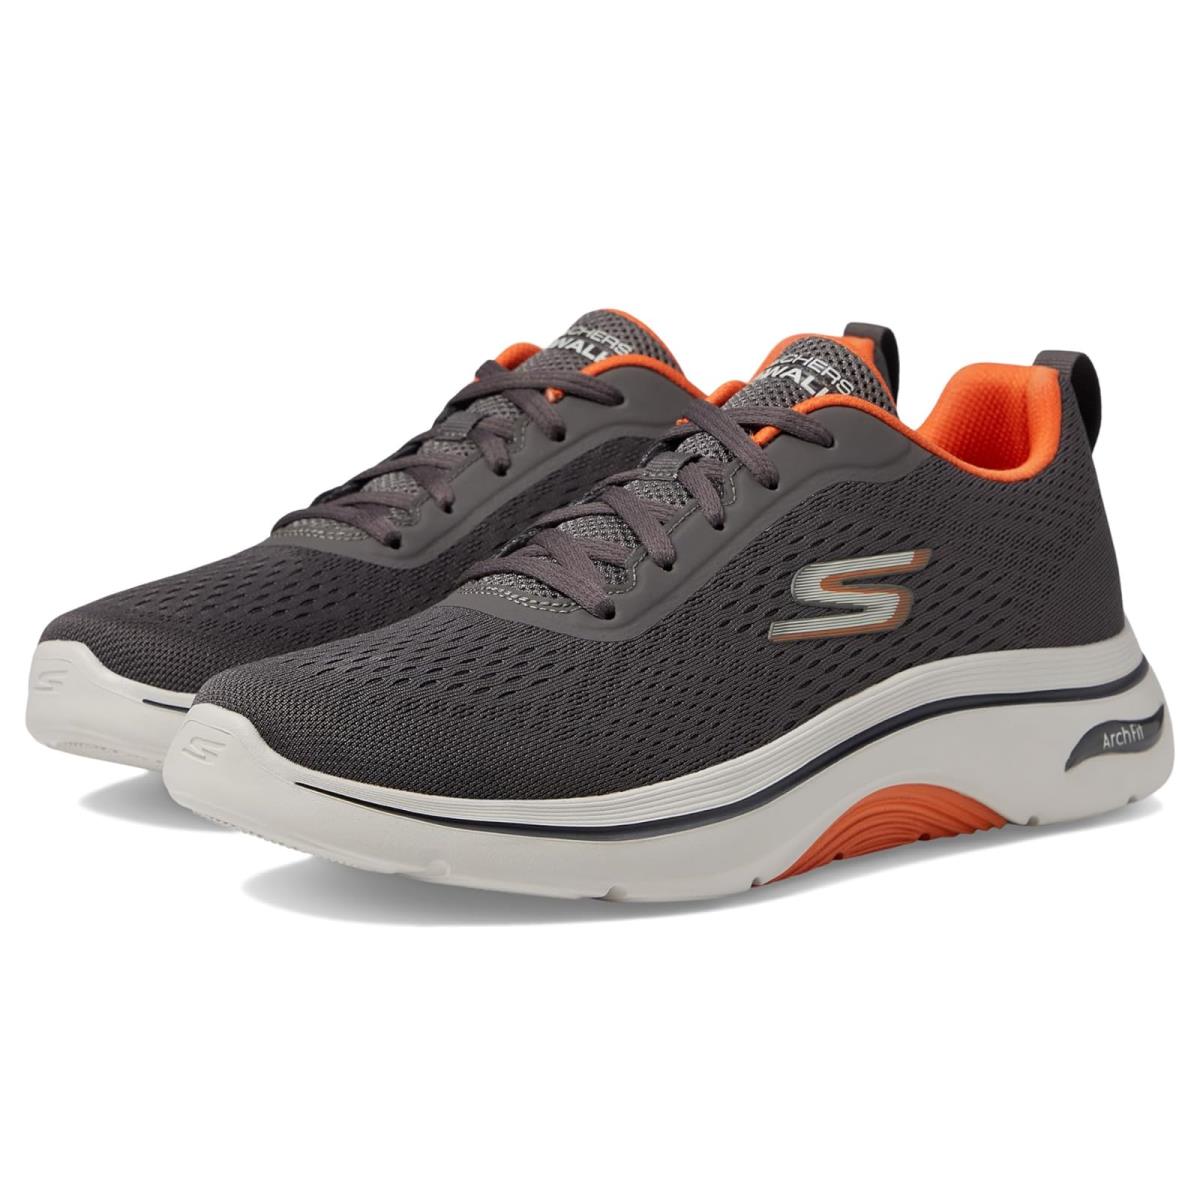 Man`s Sneakers Athletic Shoes Skechers Performance Go Walk Arch Fit 2.0 Charcoal/Orange